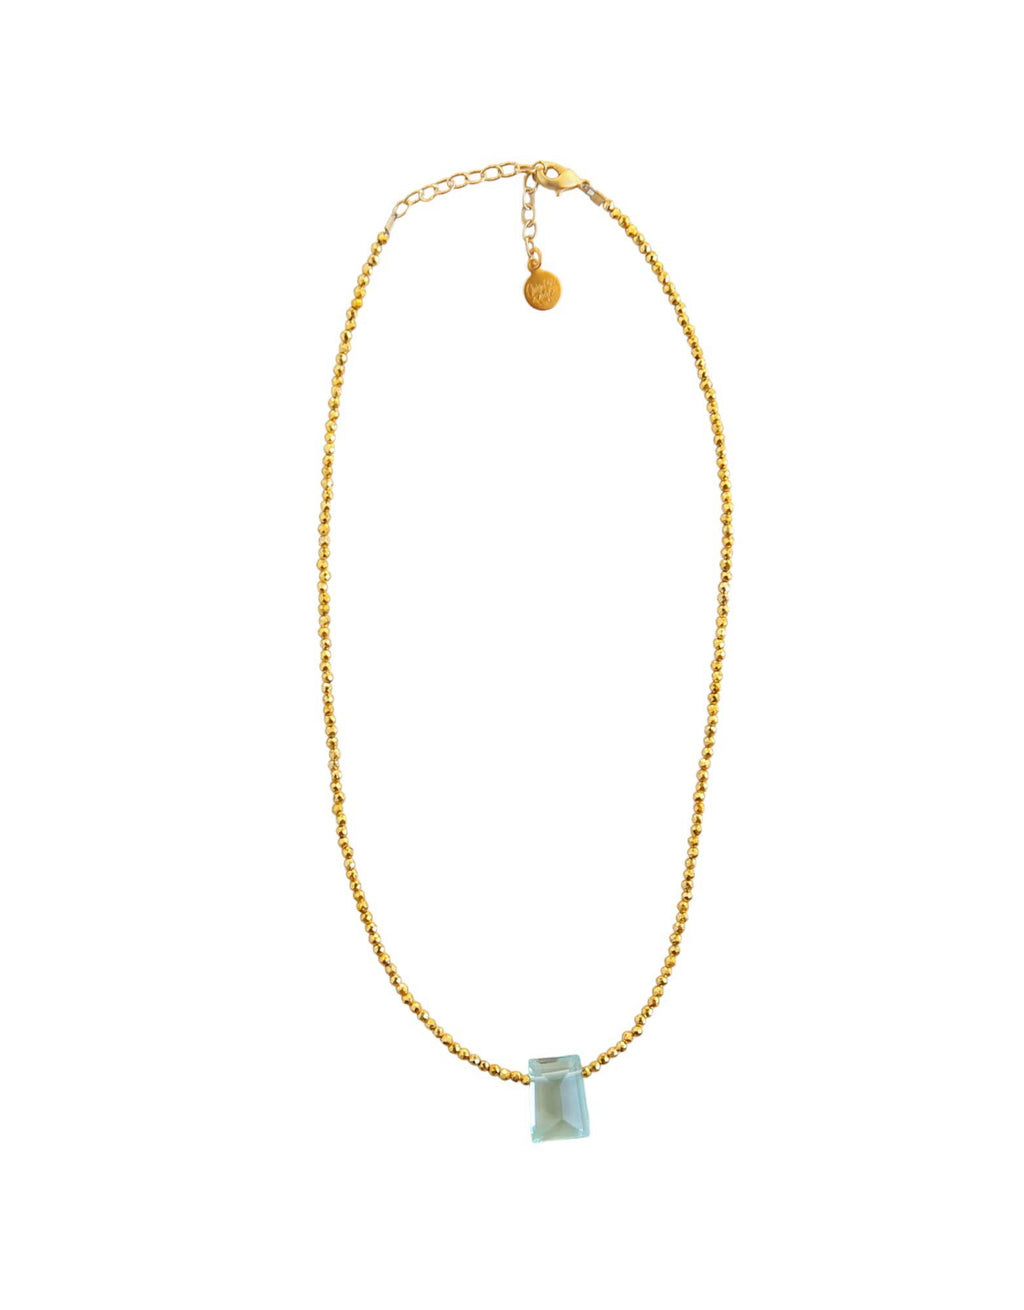 Catherine Page Ocean Stone Necklace